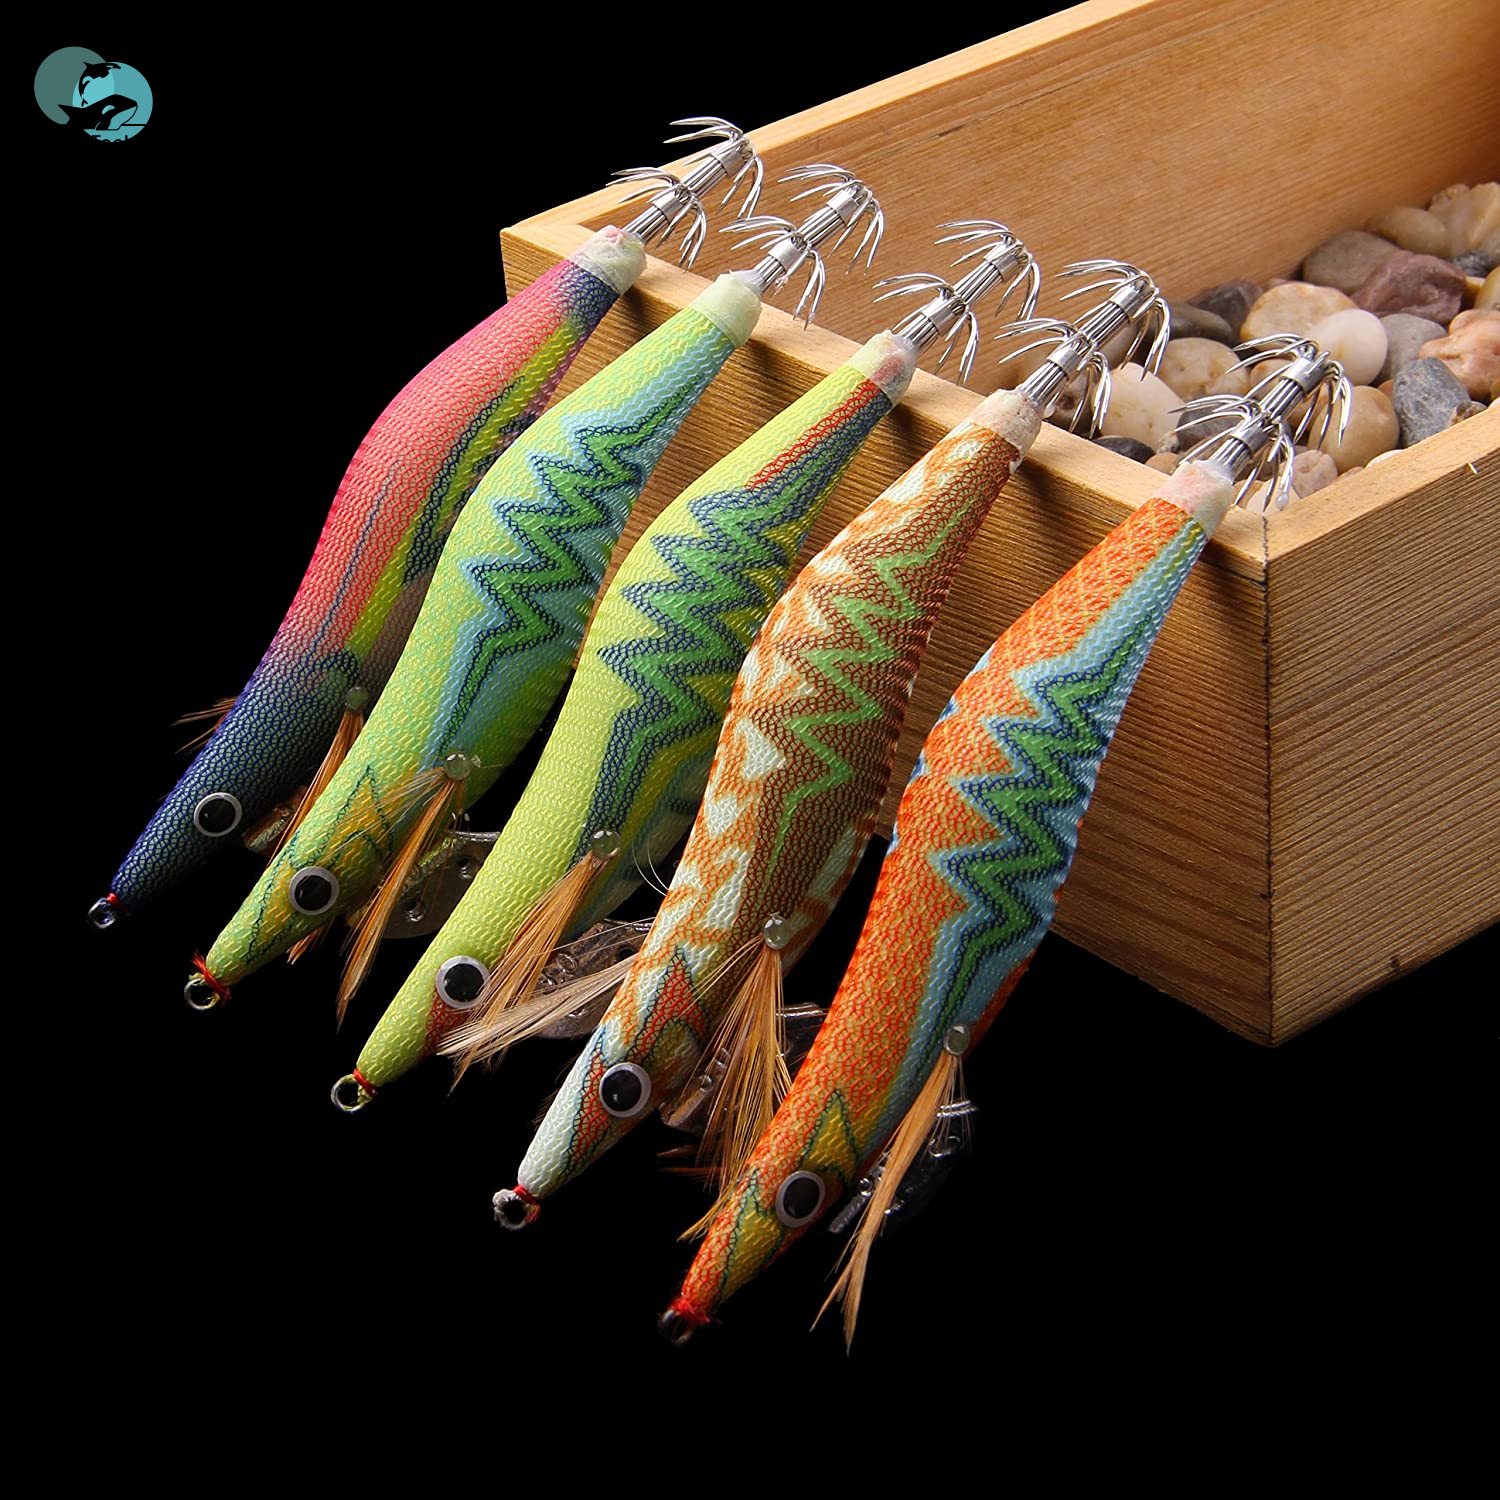 Wooden Fishing Bait Set Shrimp, Squid, And More Hooks And Micro Fishing  Lures Luminated Jigs Sea Artificial Sizes 2.5# To 3.0# 230504 From Piao09,  $7.4